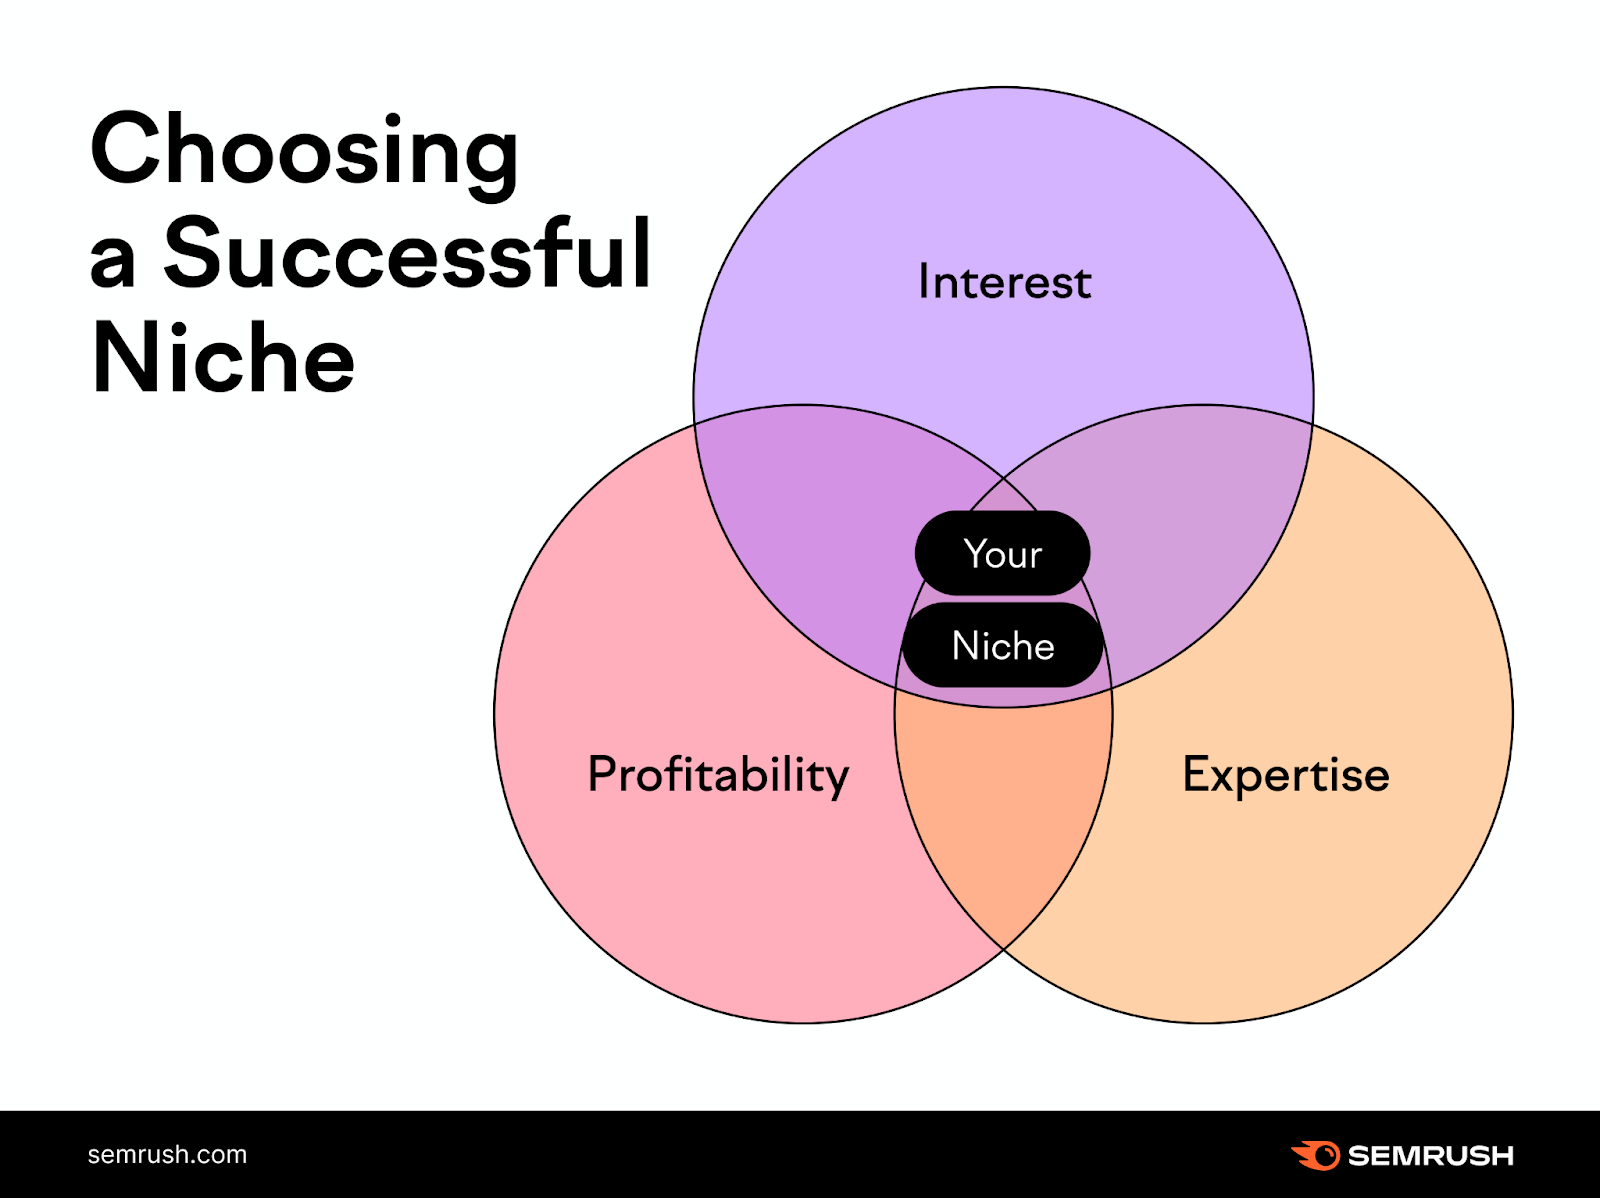 Choosing a successful niche includes considering interest, profitability, and expertise